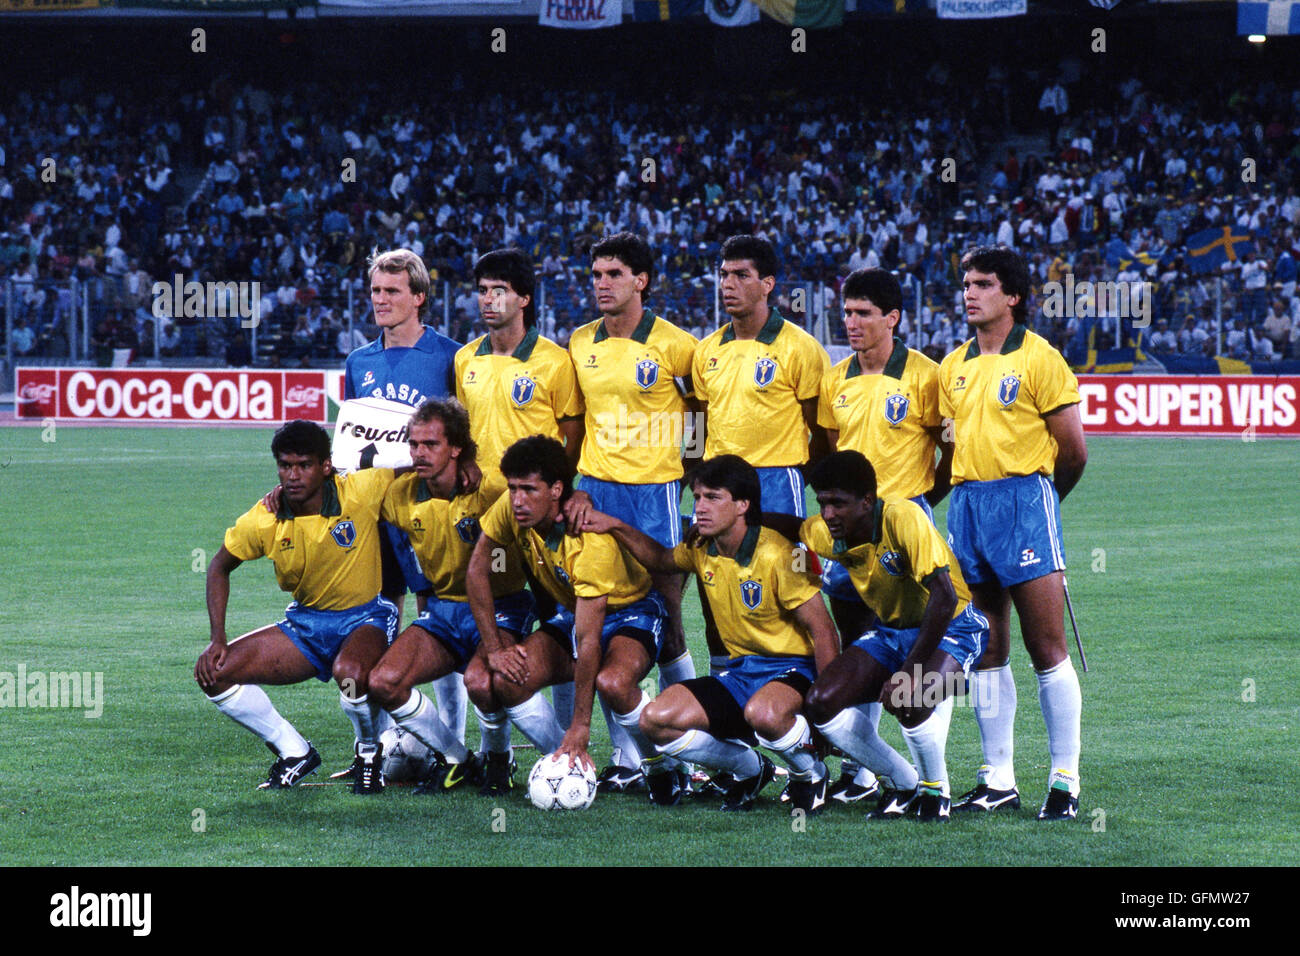 Brazil team group line-up (BRA), JUNE 10, 1990 - Football / Soccer : Brazil team group shot (Top row - L to R) Taffarel, Mauro Galvao, Ricardo Gomes, Mozer, Jorginho, Branco, (Bottom row - L to R) Muller, Alemao, Careca, Dunga and Valdo before the 1990 FIFA World Cup Italy Group C match between Brazil 2-1 Sweden at Stadio delle Alpi in Turin, Italy. (Photo by Juha Tamminen/AFLO) (Minumum pricing : EUR100 per picture) Stock Photo